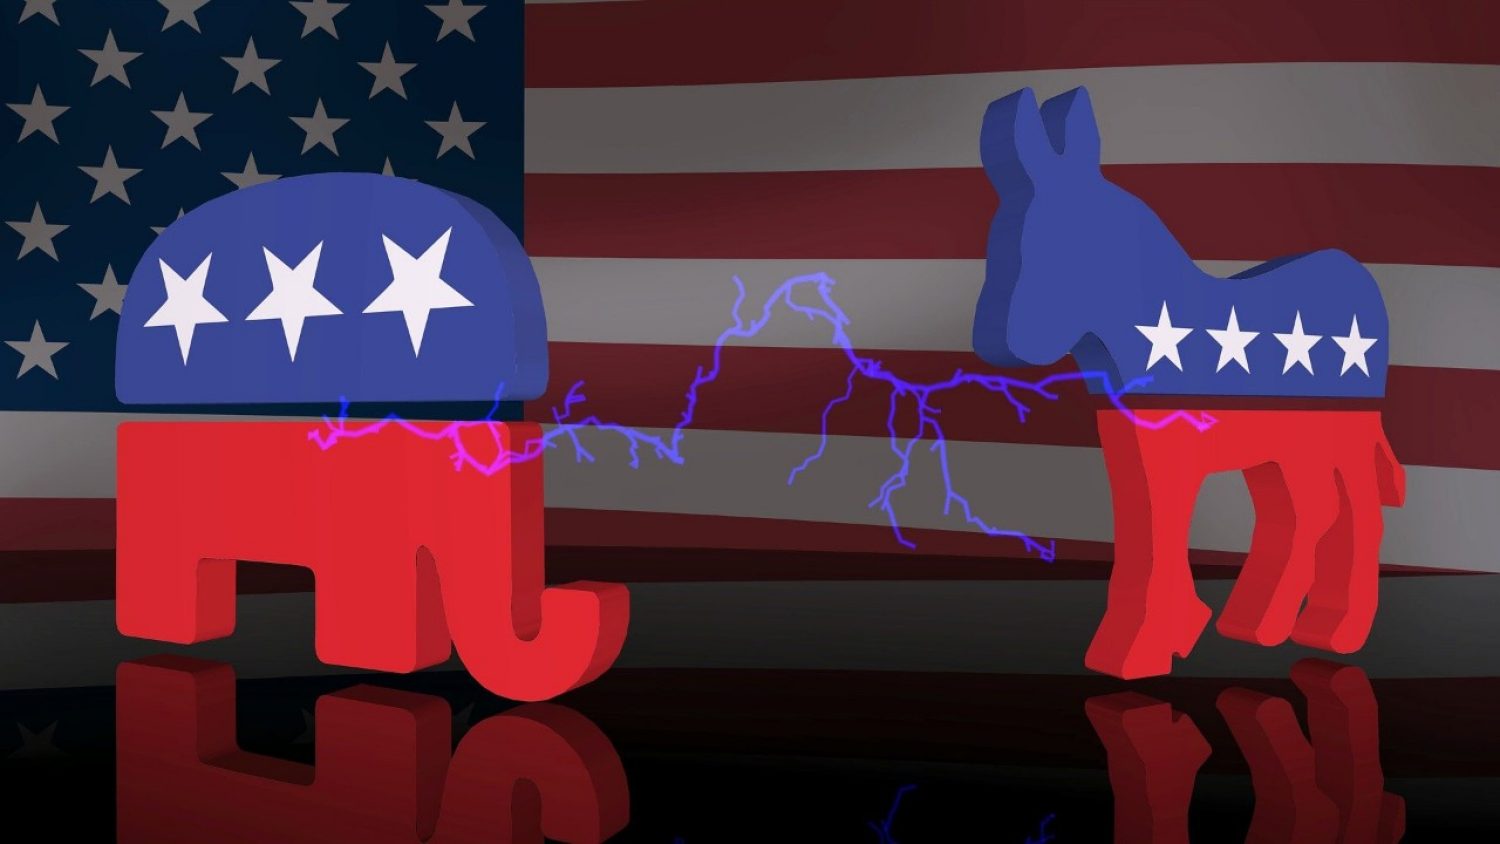 elephant and donkey political party icons